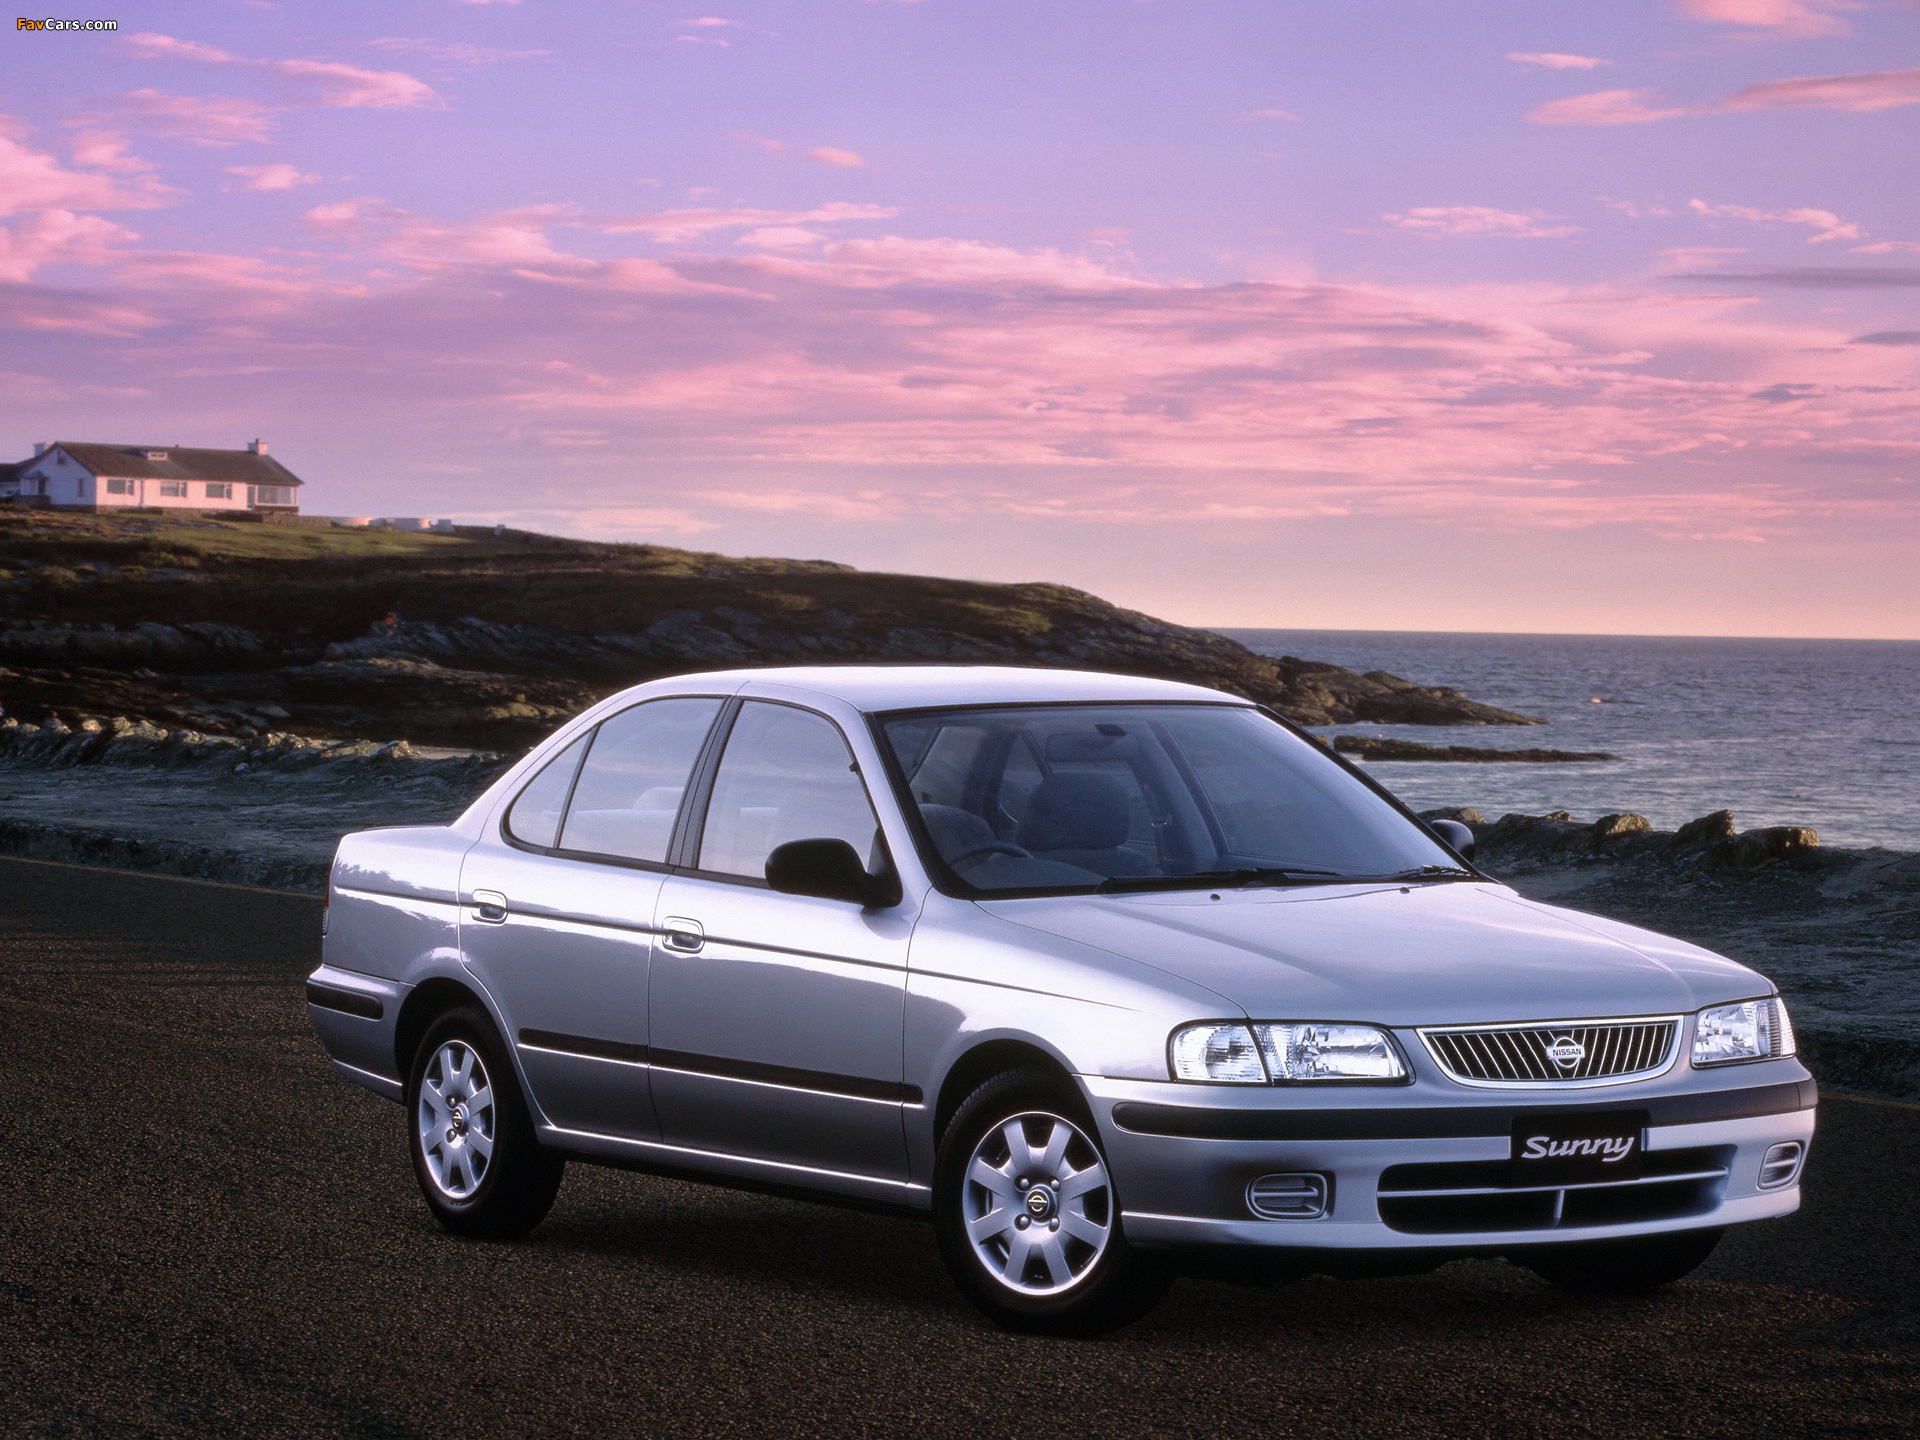 Images of Nissan Sunny (B15) 1998-2002 (1920x1440)